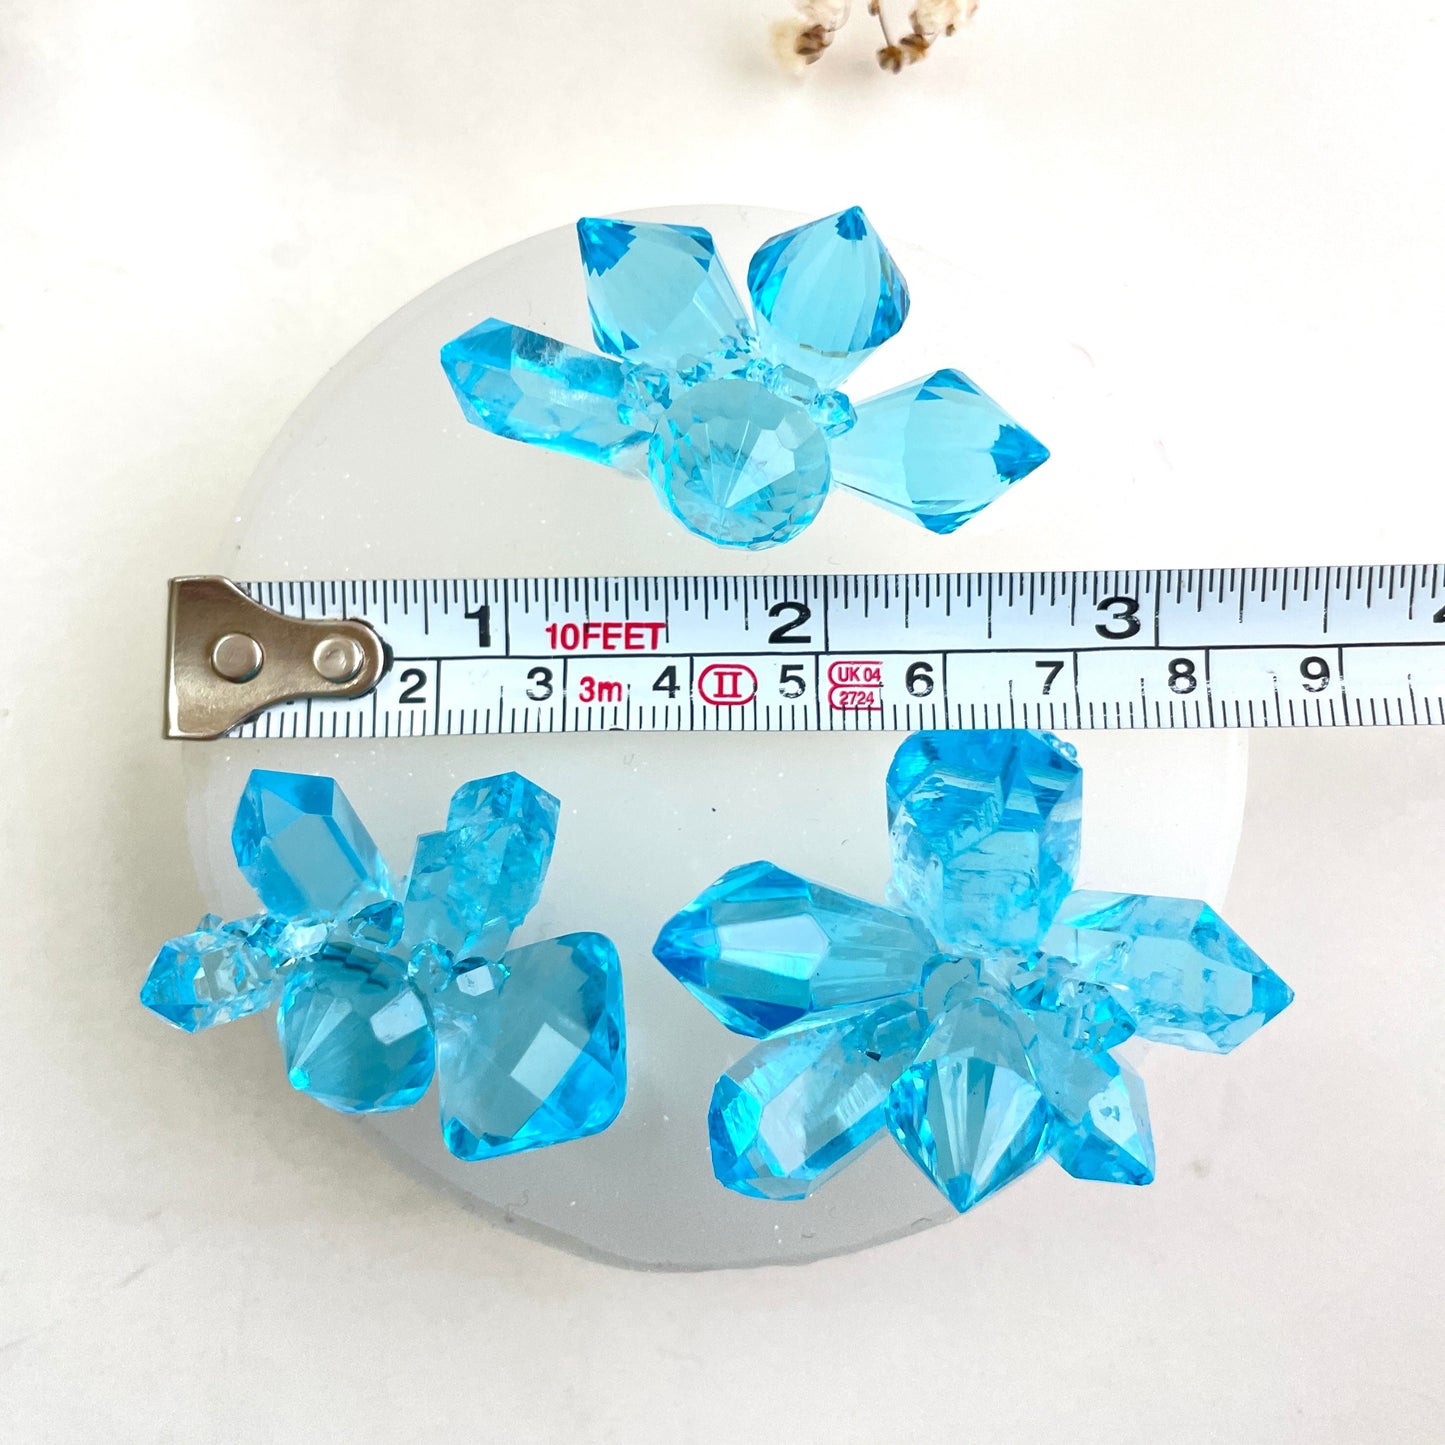 Create Stunning Resin Art with the 3 Little Crystals Silicone Mould